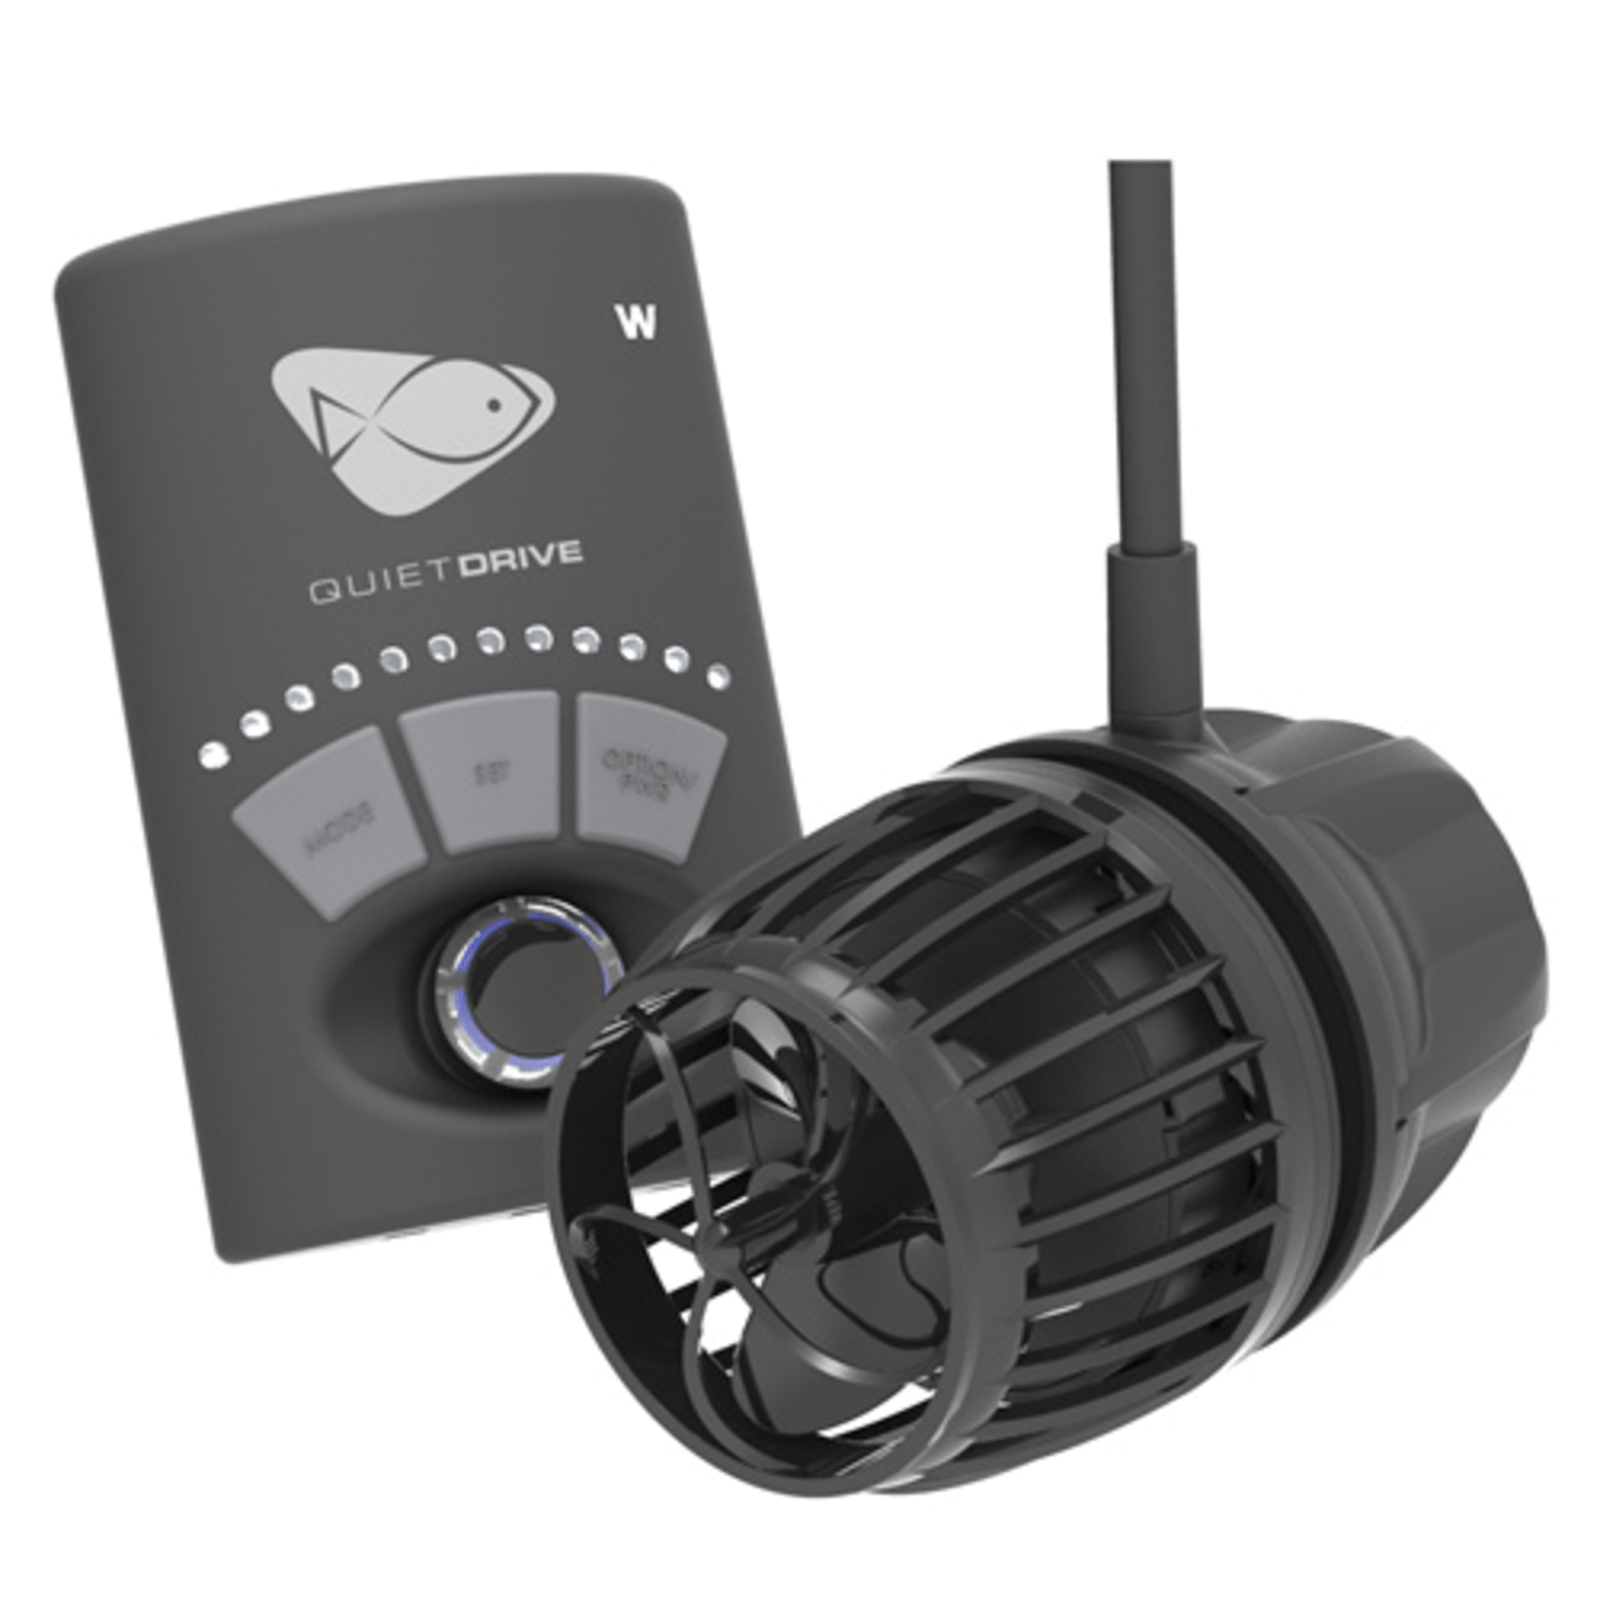 Ecotech Marine Vortech MP40wQD Quietdrive Video Review from  May 9, 2016